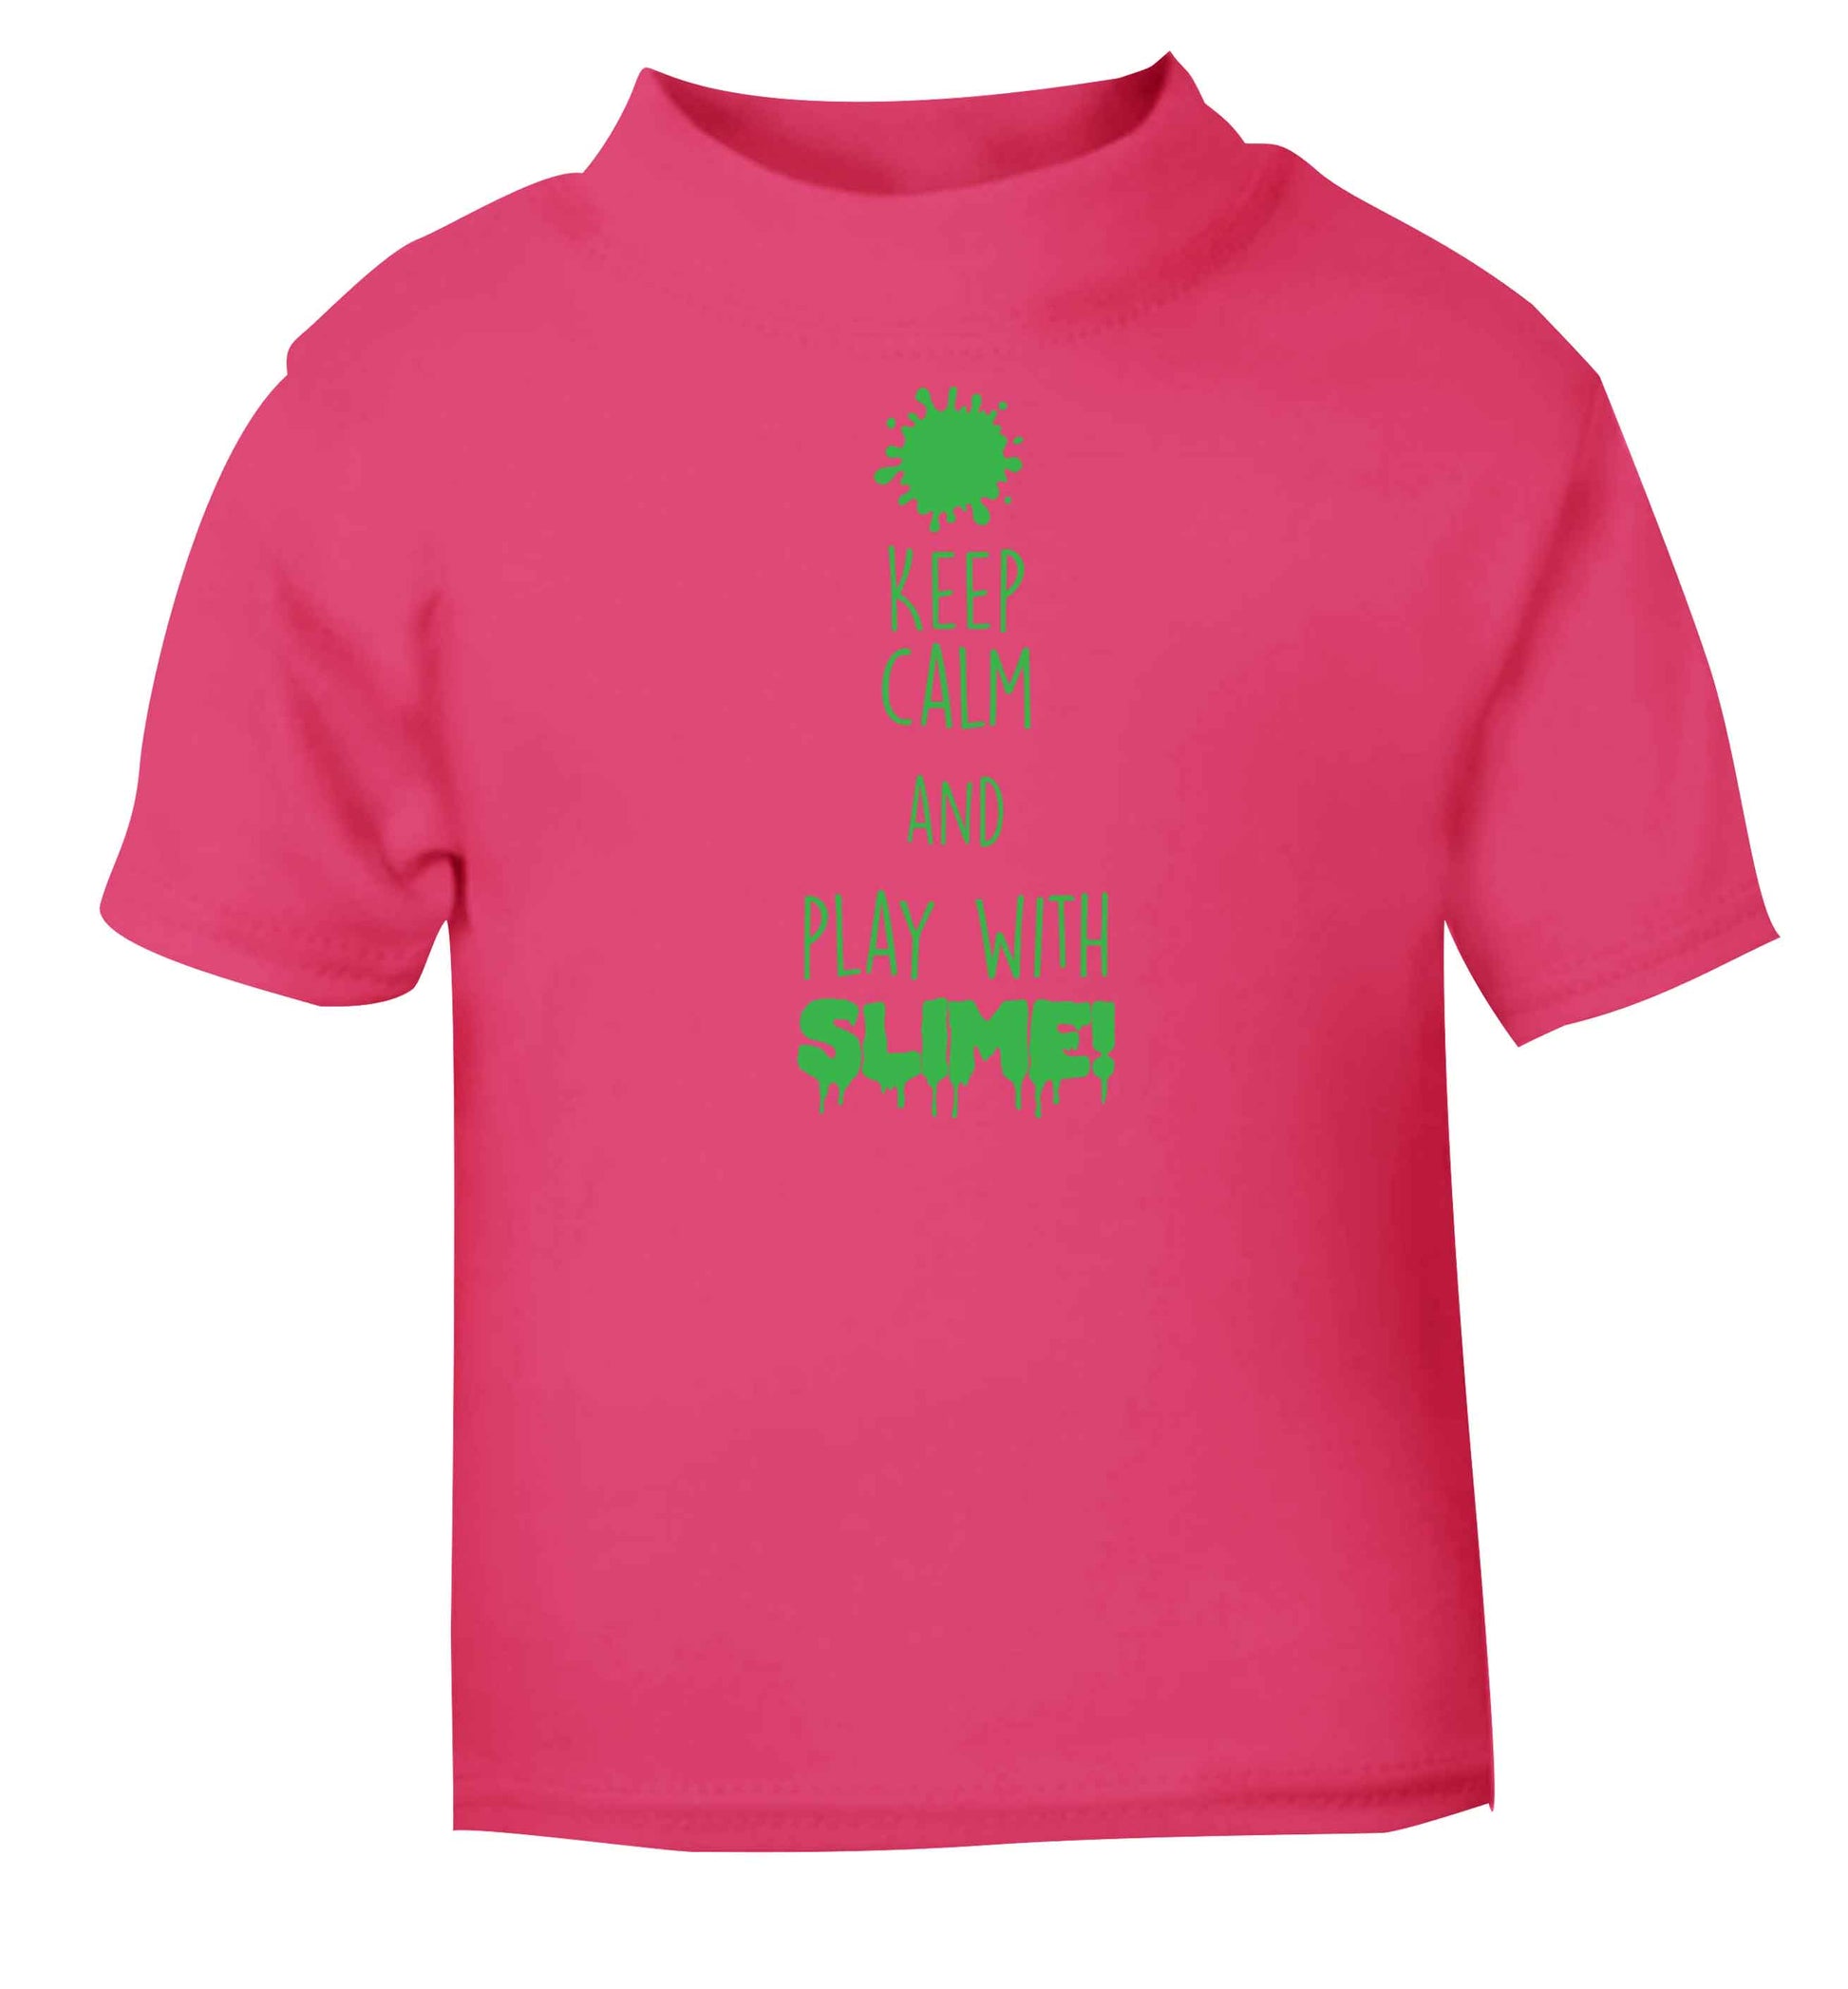 Neon green keep calm and play with slime!pink baby toddler Tshirt 2 Years